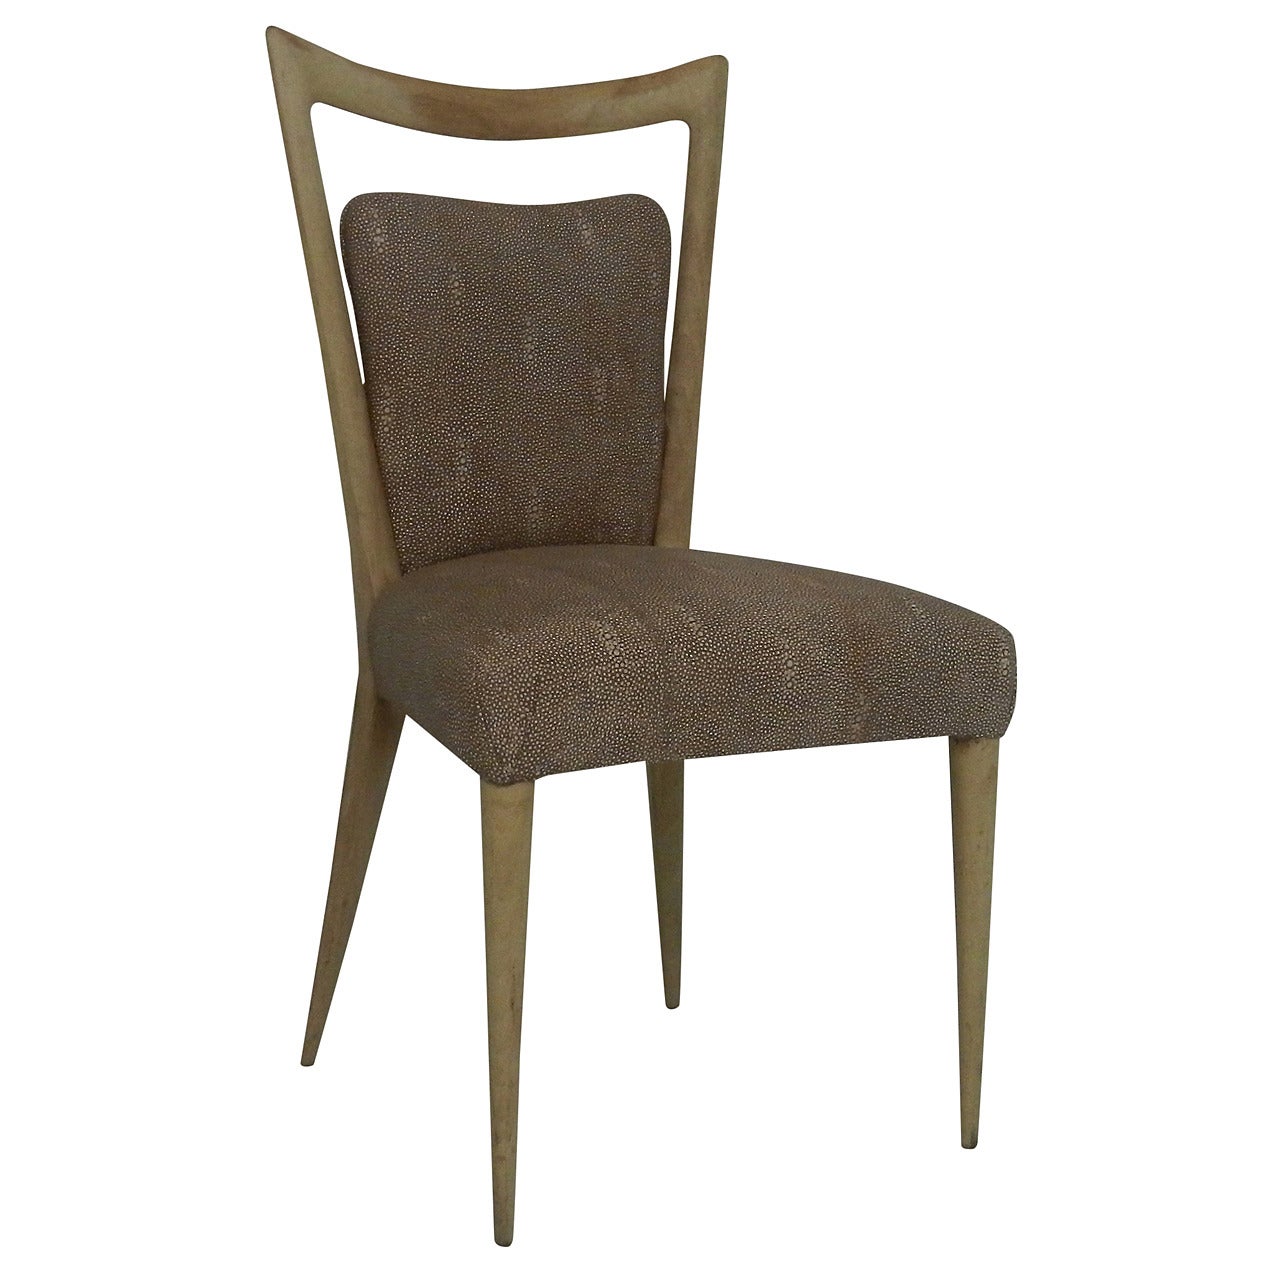 Melchiorre Bega Dining Chair